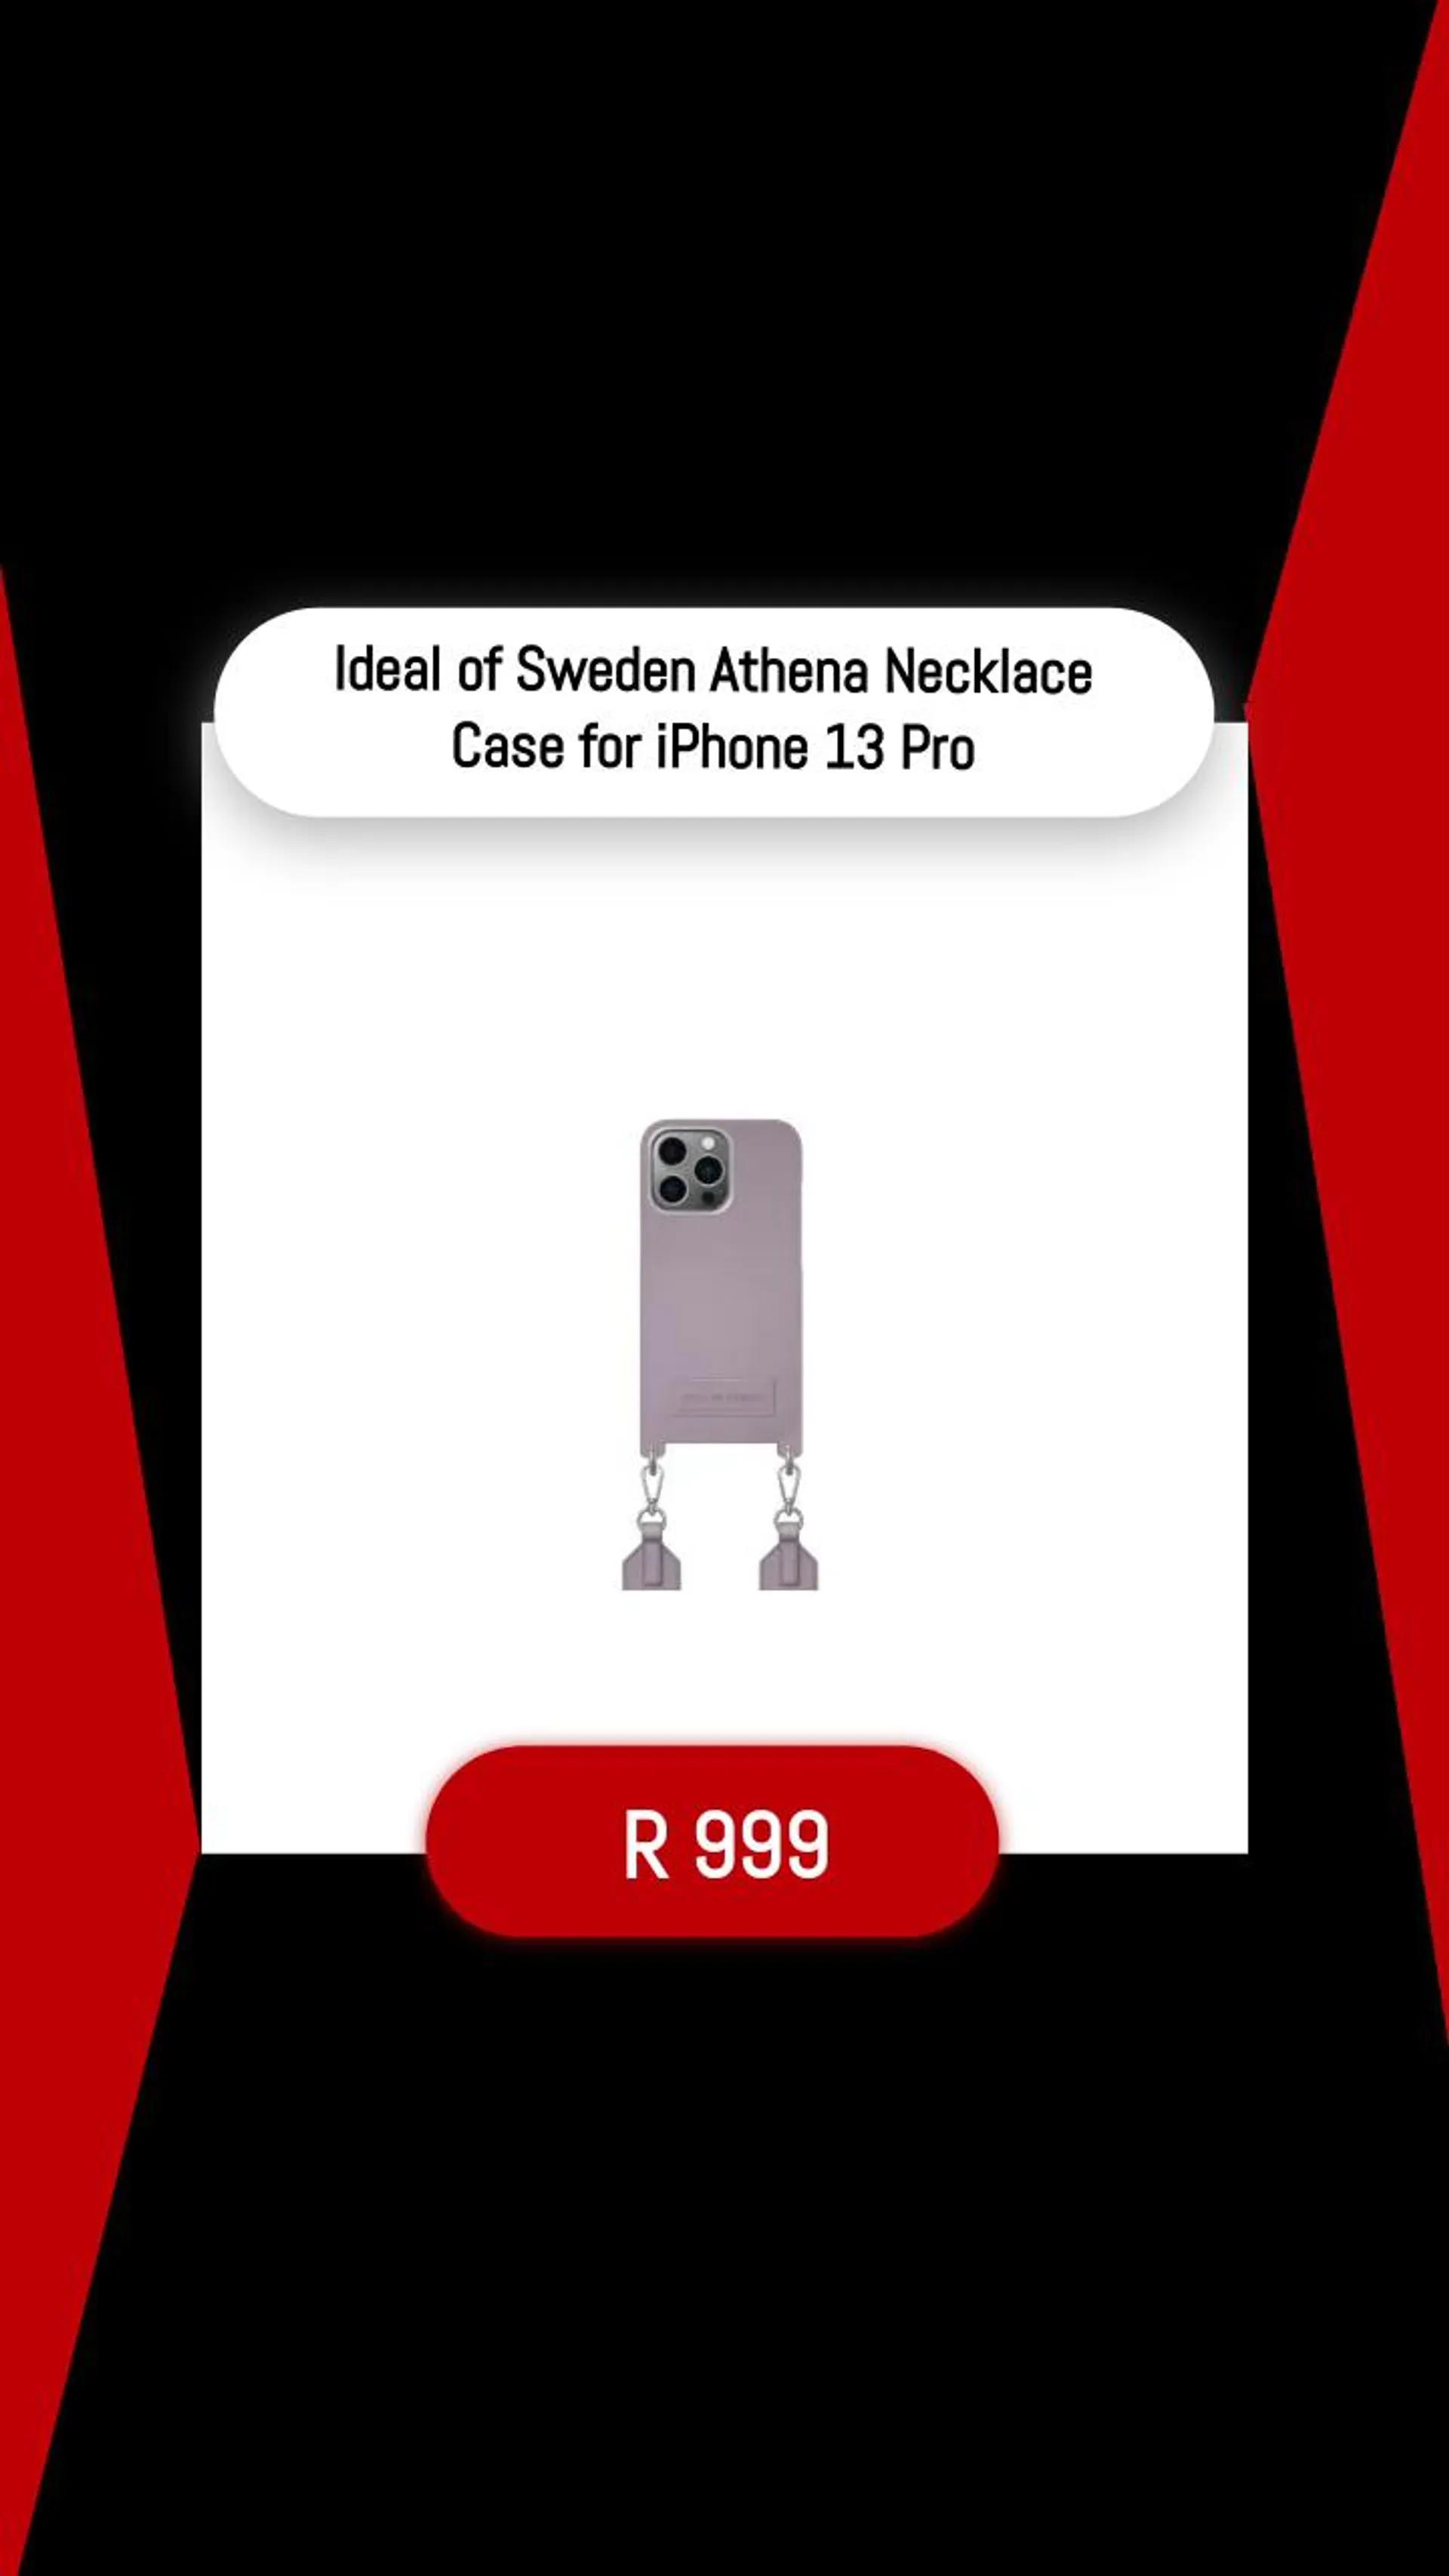 Ideal of Sweden Athena Necklace Case for iPhone 13 Pro